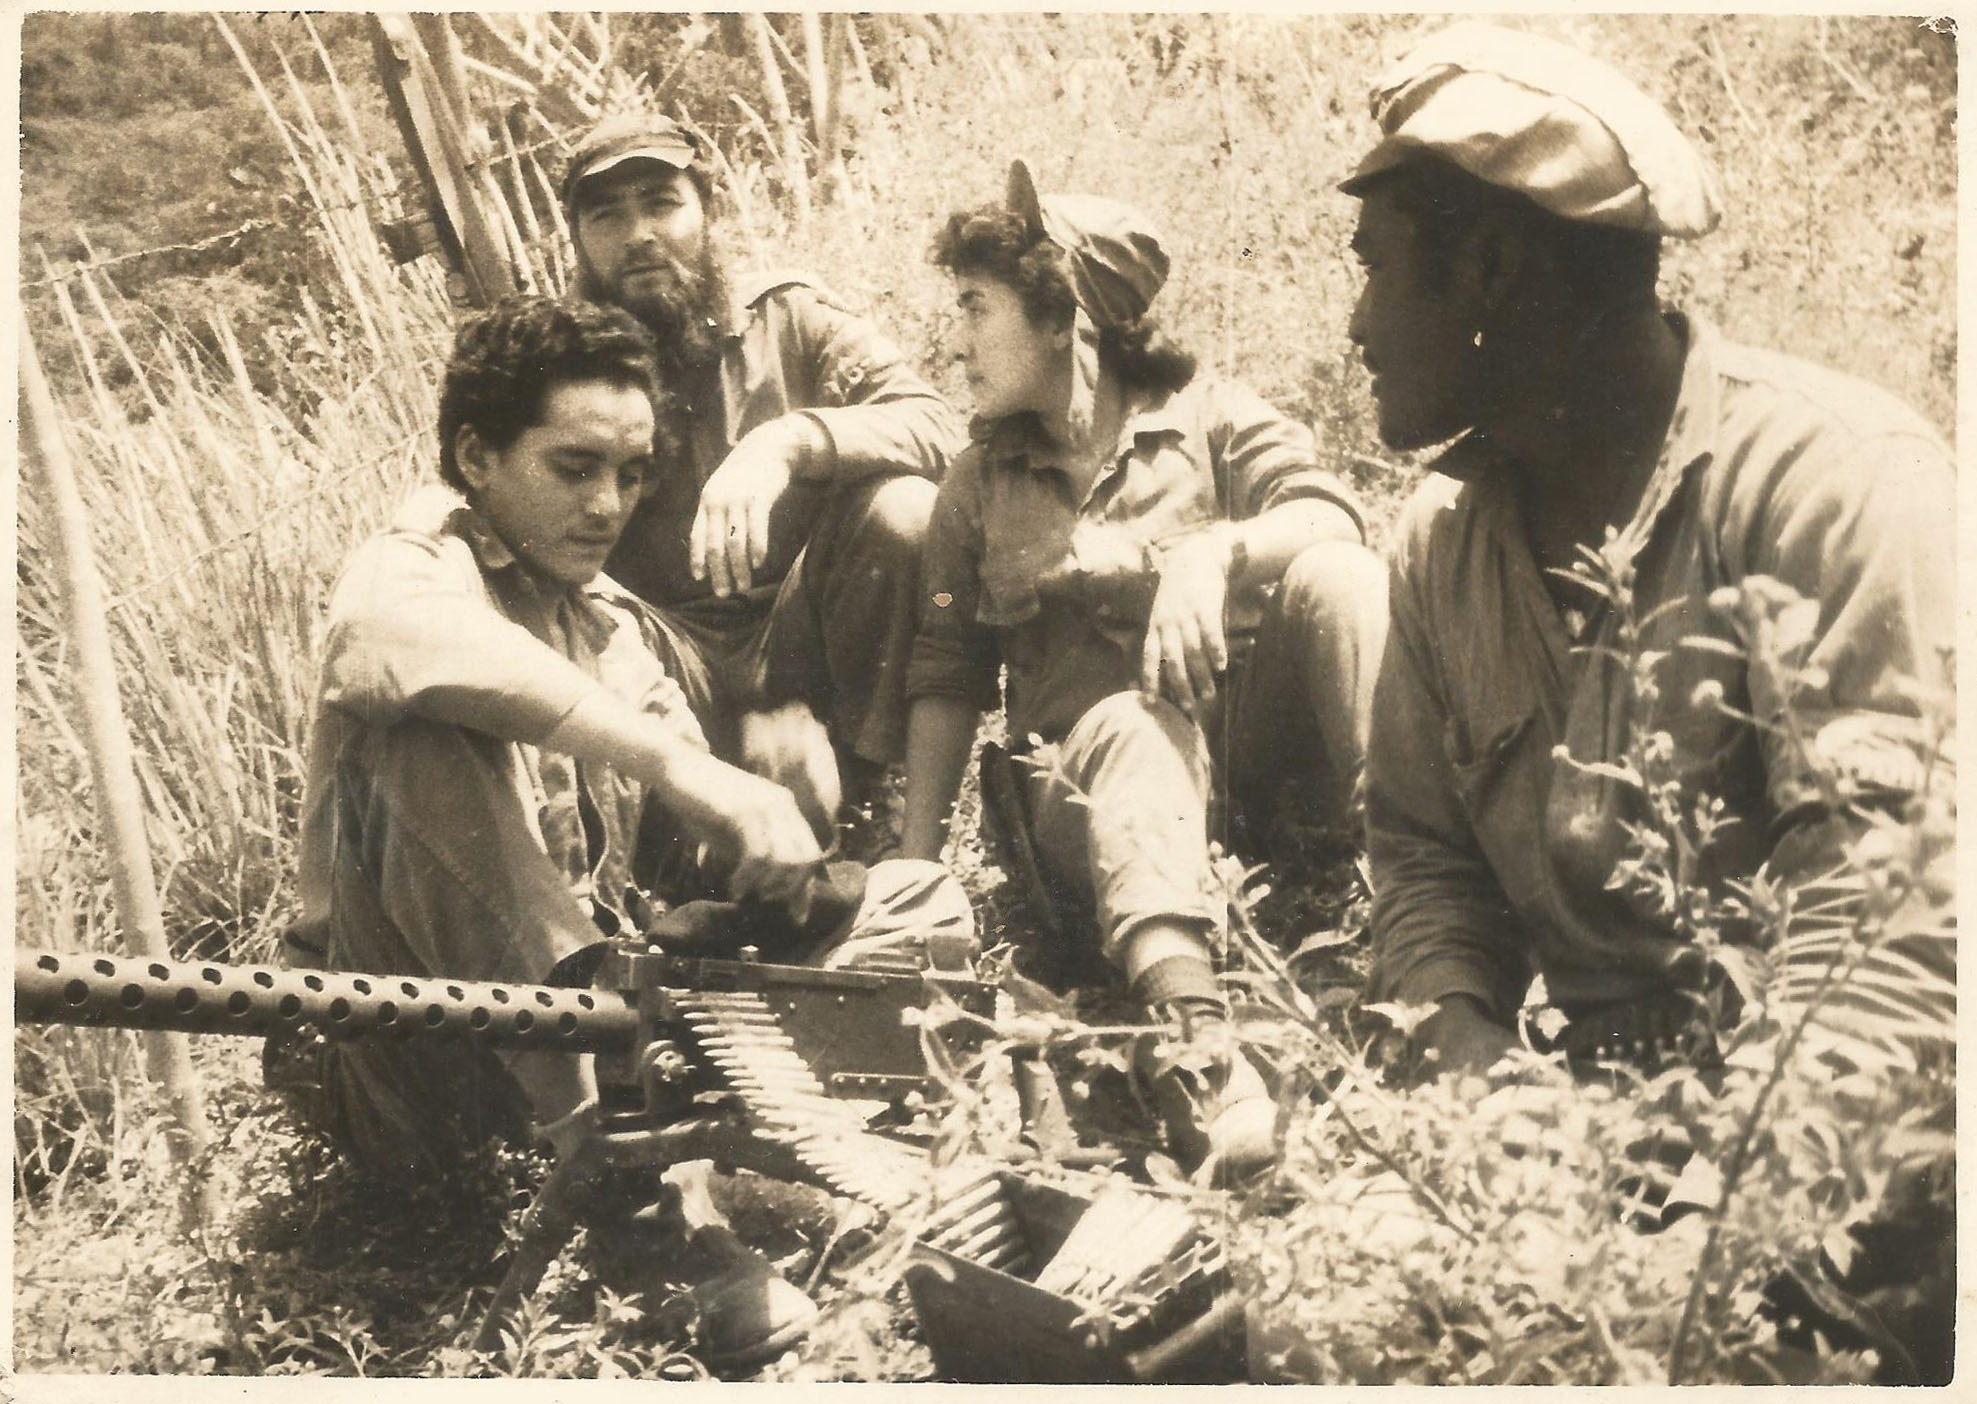 In the Sierra Maestra, Paco (behind) was a leader in the struggle.